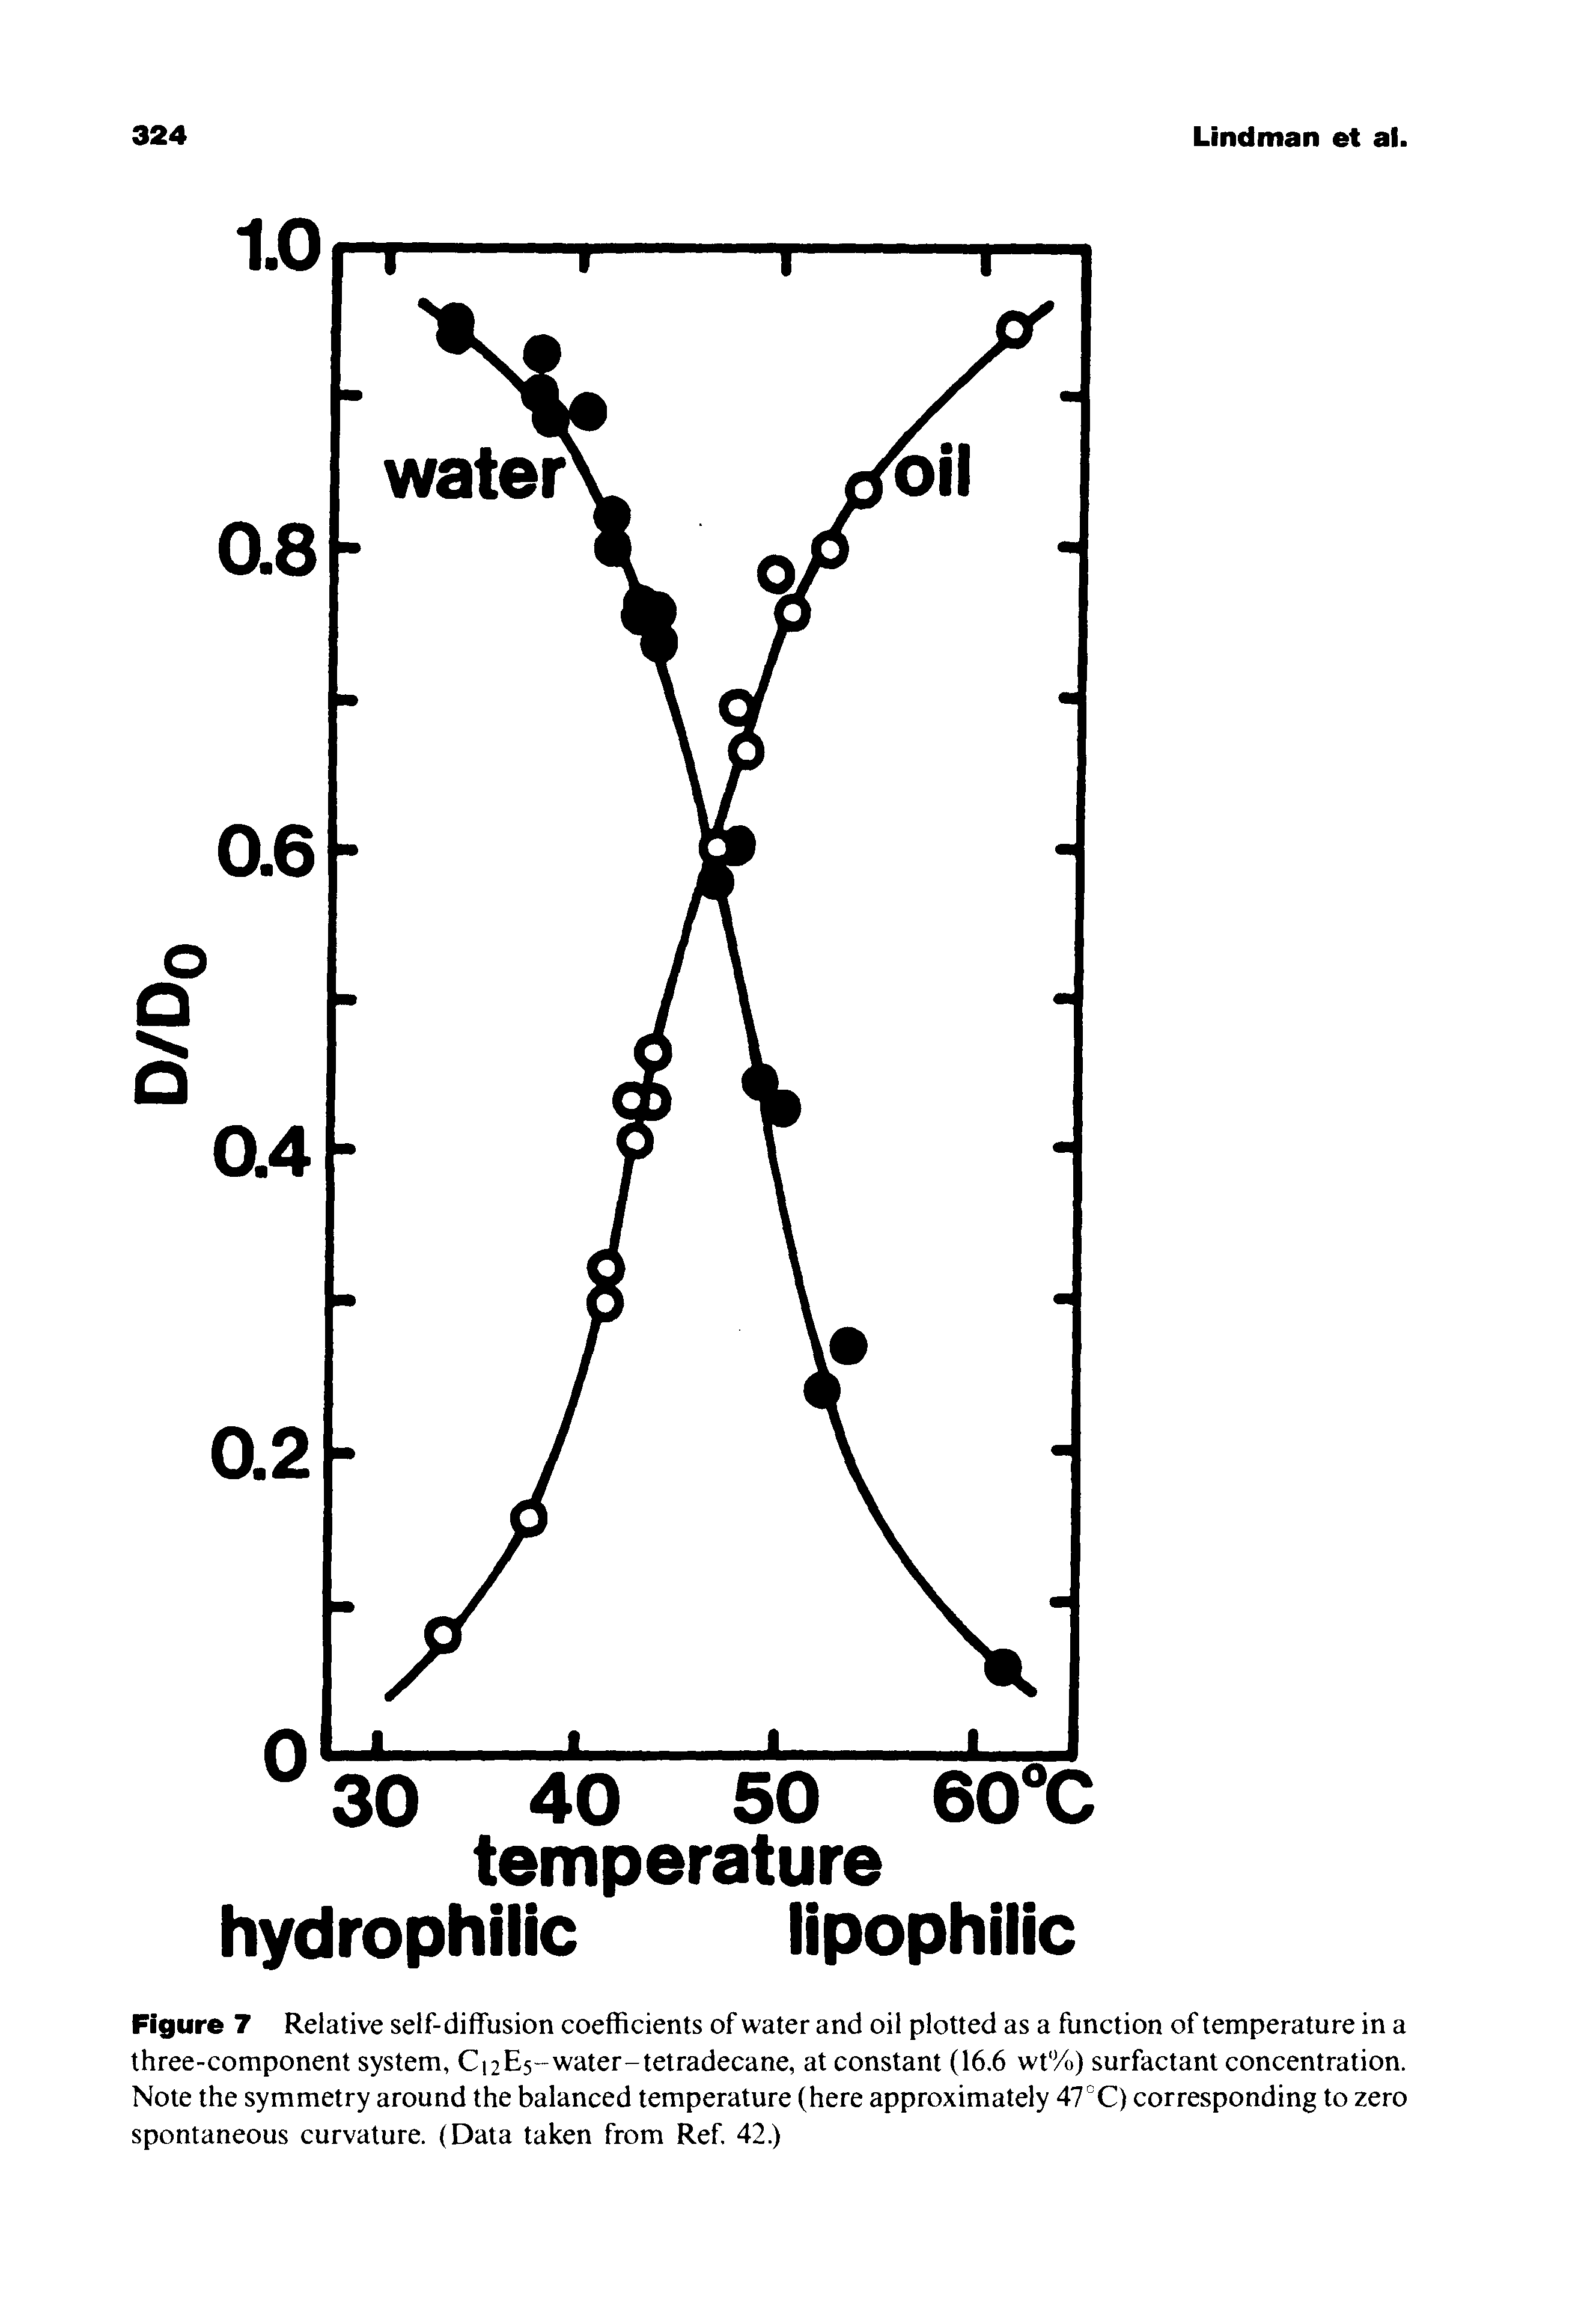 Figure 7 Relative self-diffusion coefficients of water and oil plotted as a function of temperature in a three-component system, Ci2E5-water-tetradecane, at constant (16.6 wt%) surfactant concentration. Note the symmetry around the balanced temperature (here approximately 47°C) corresponding to zero spontaneous curvature. (Data taken from Ref 42.)...